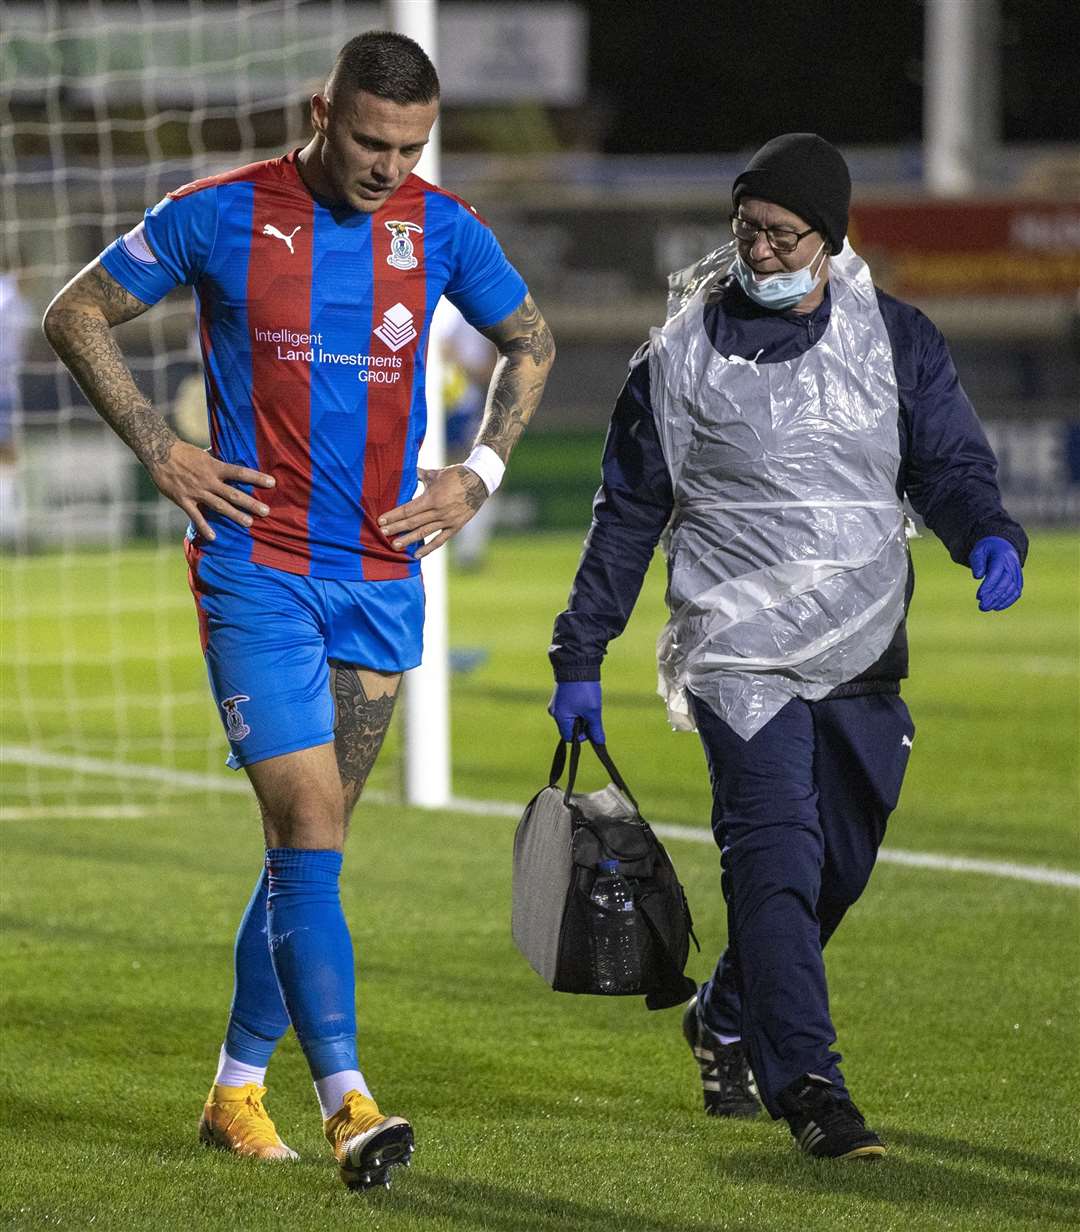 Picture - Ken Macpherson, Inverness. Betfred Cup Matchday 3 Inverness CT v Cowdenbeath. 13.10.20. ICT’s Miles Storey is forced off early in the first half with an injury.